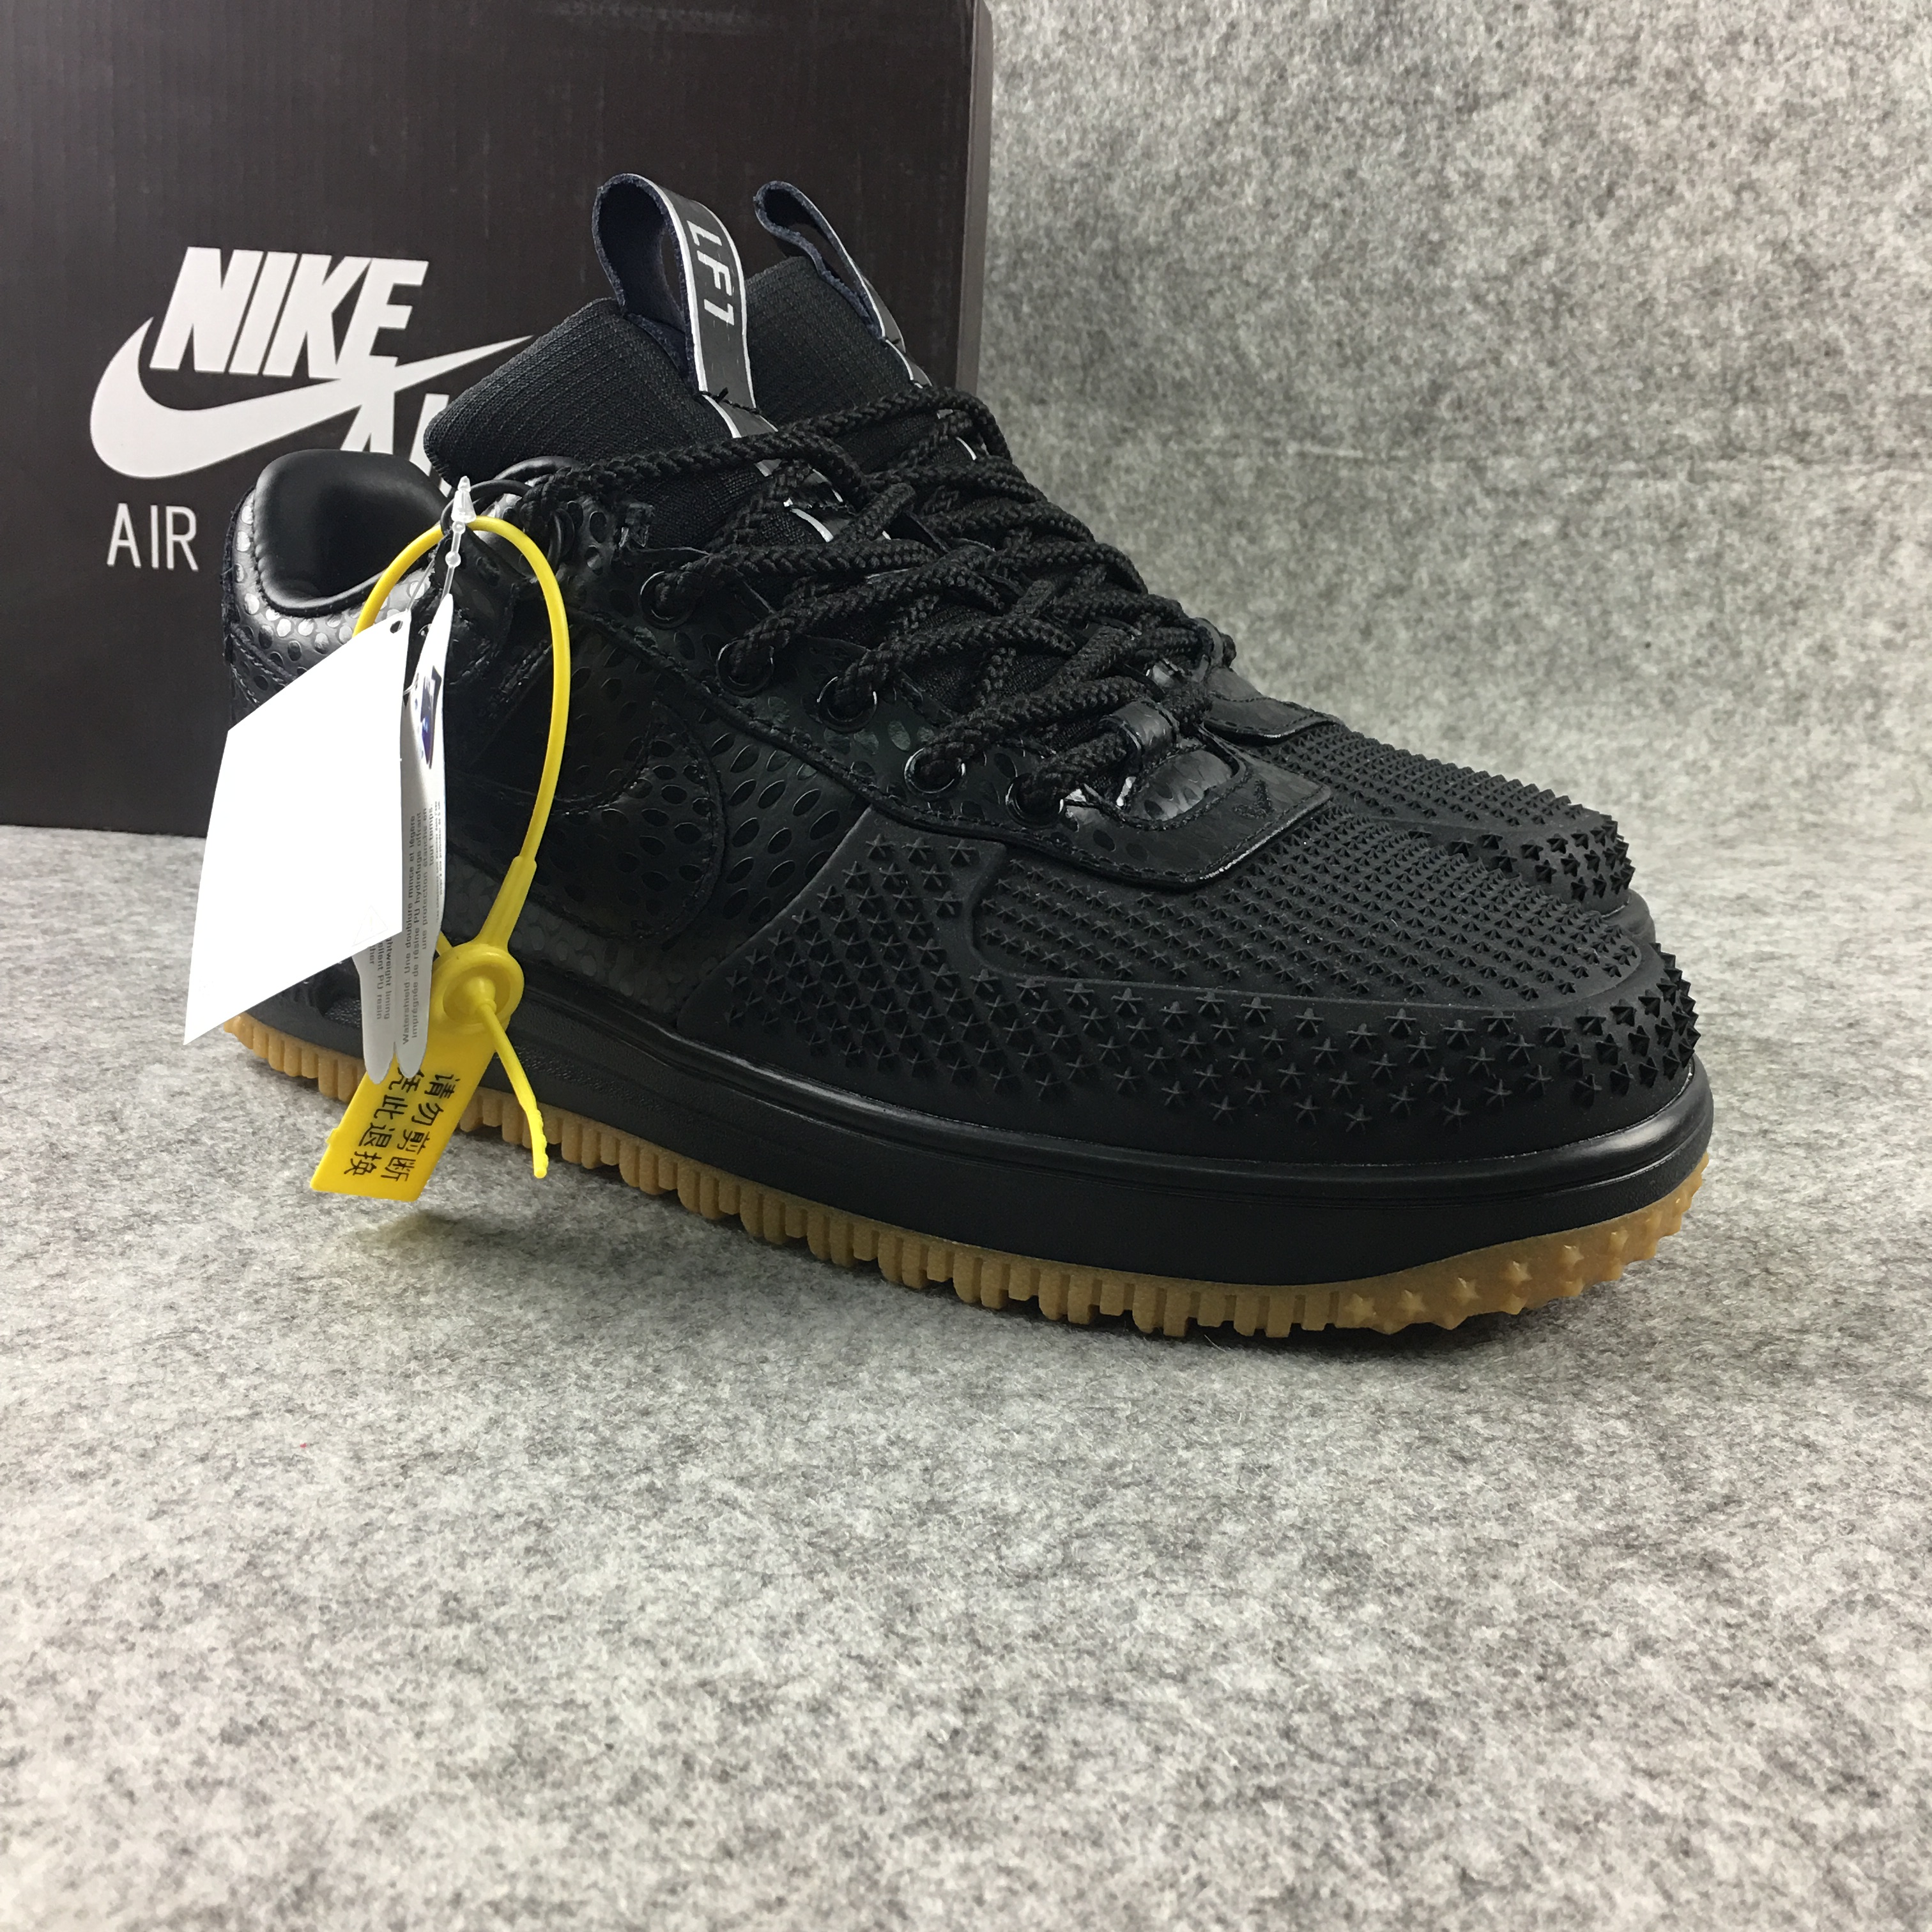 Nike Lunar Force 1 Low All Black Shoes - Click Image to Close